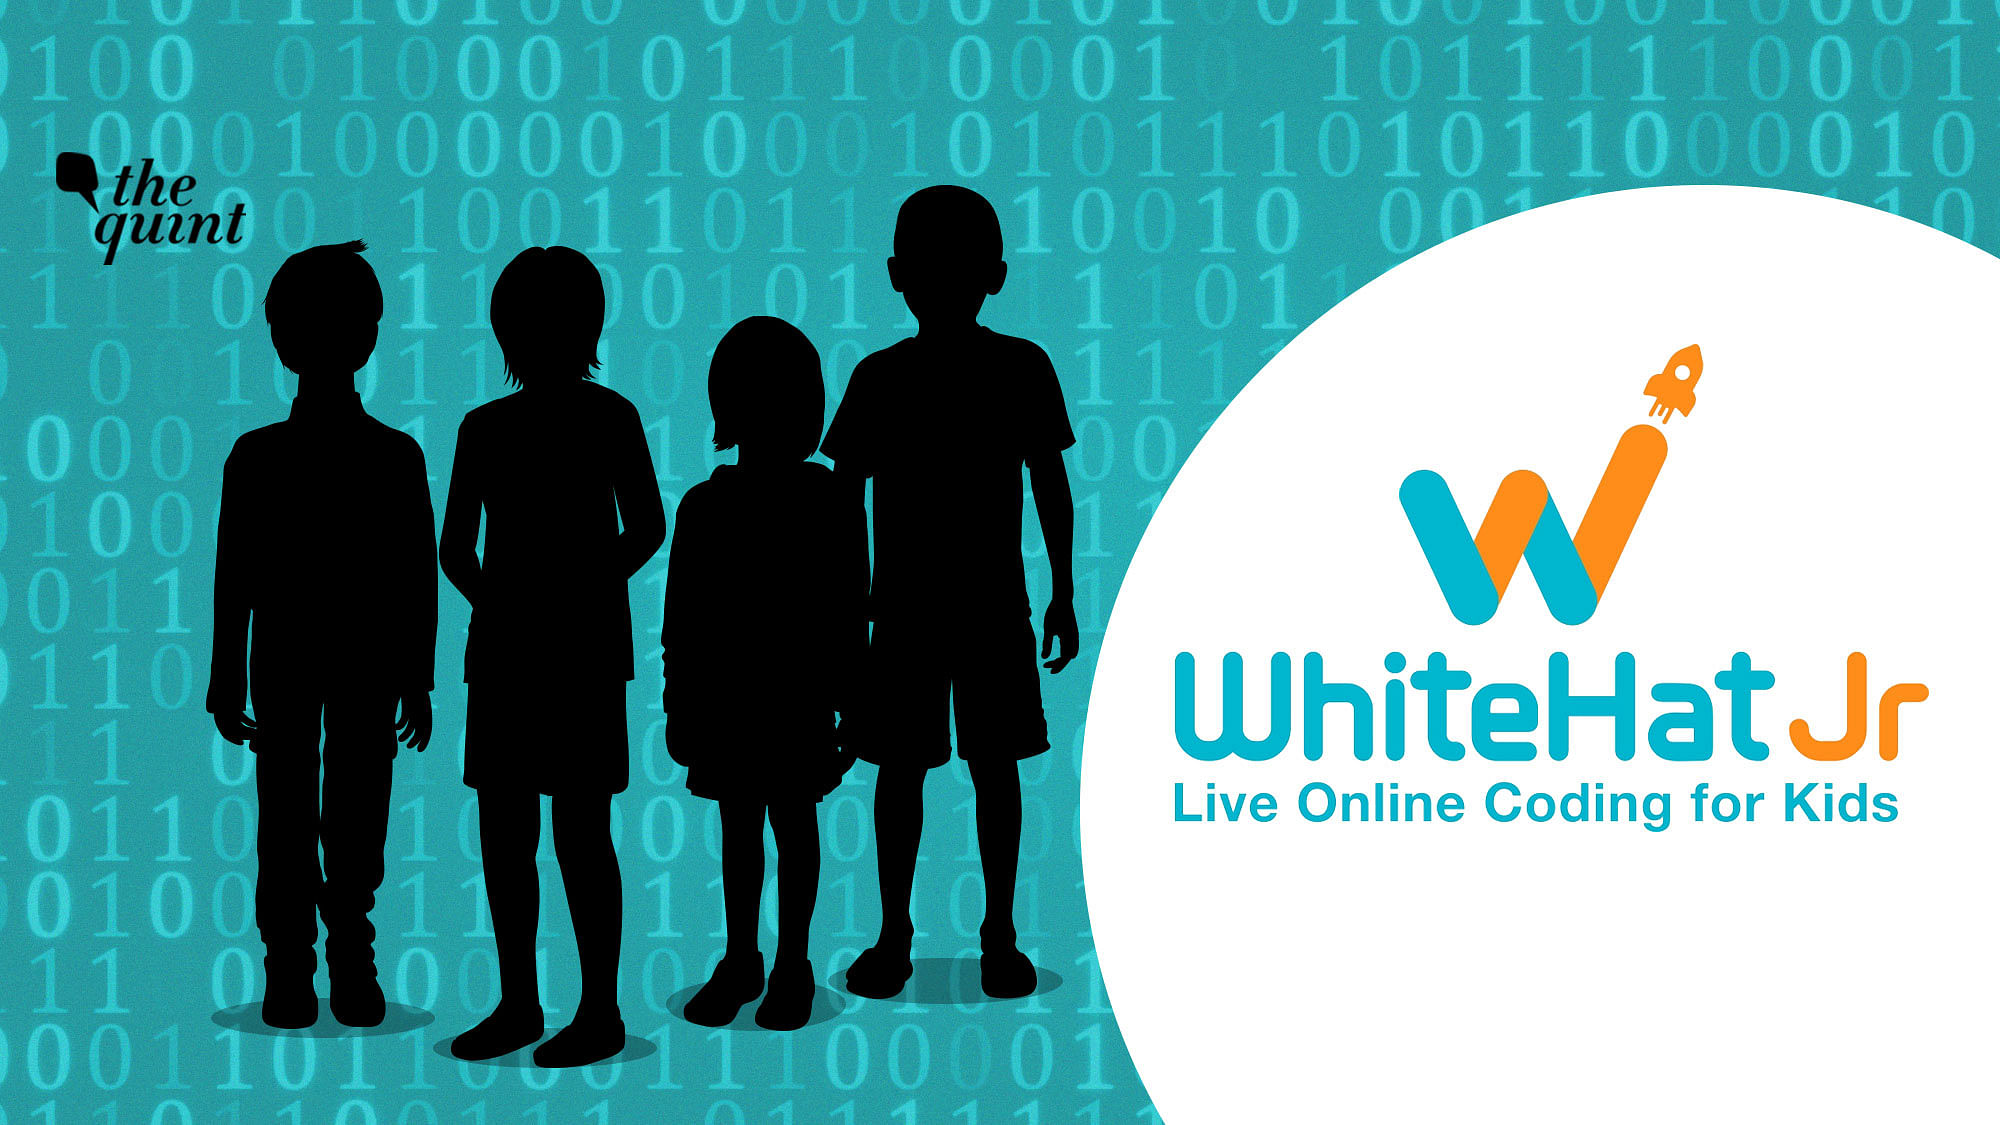 WhiteHat Jr server had exposed personal data of 2.8 lakh students.